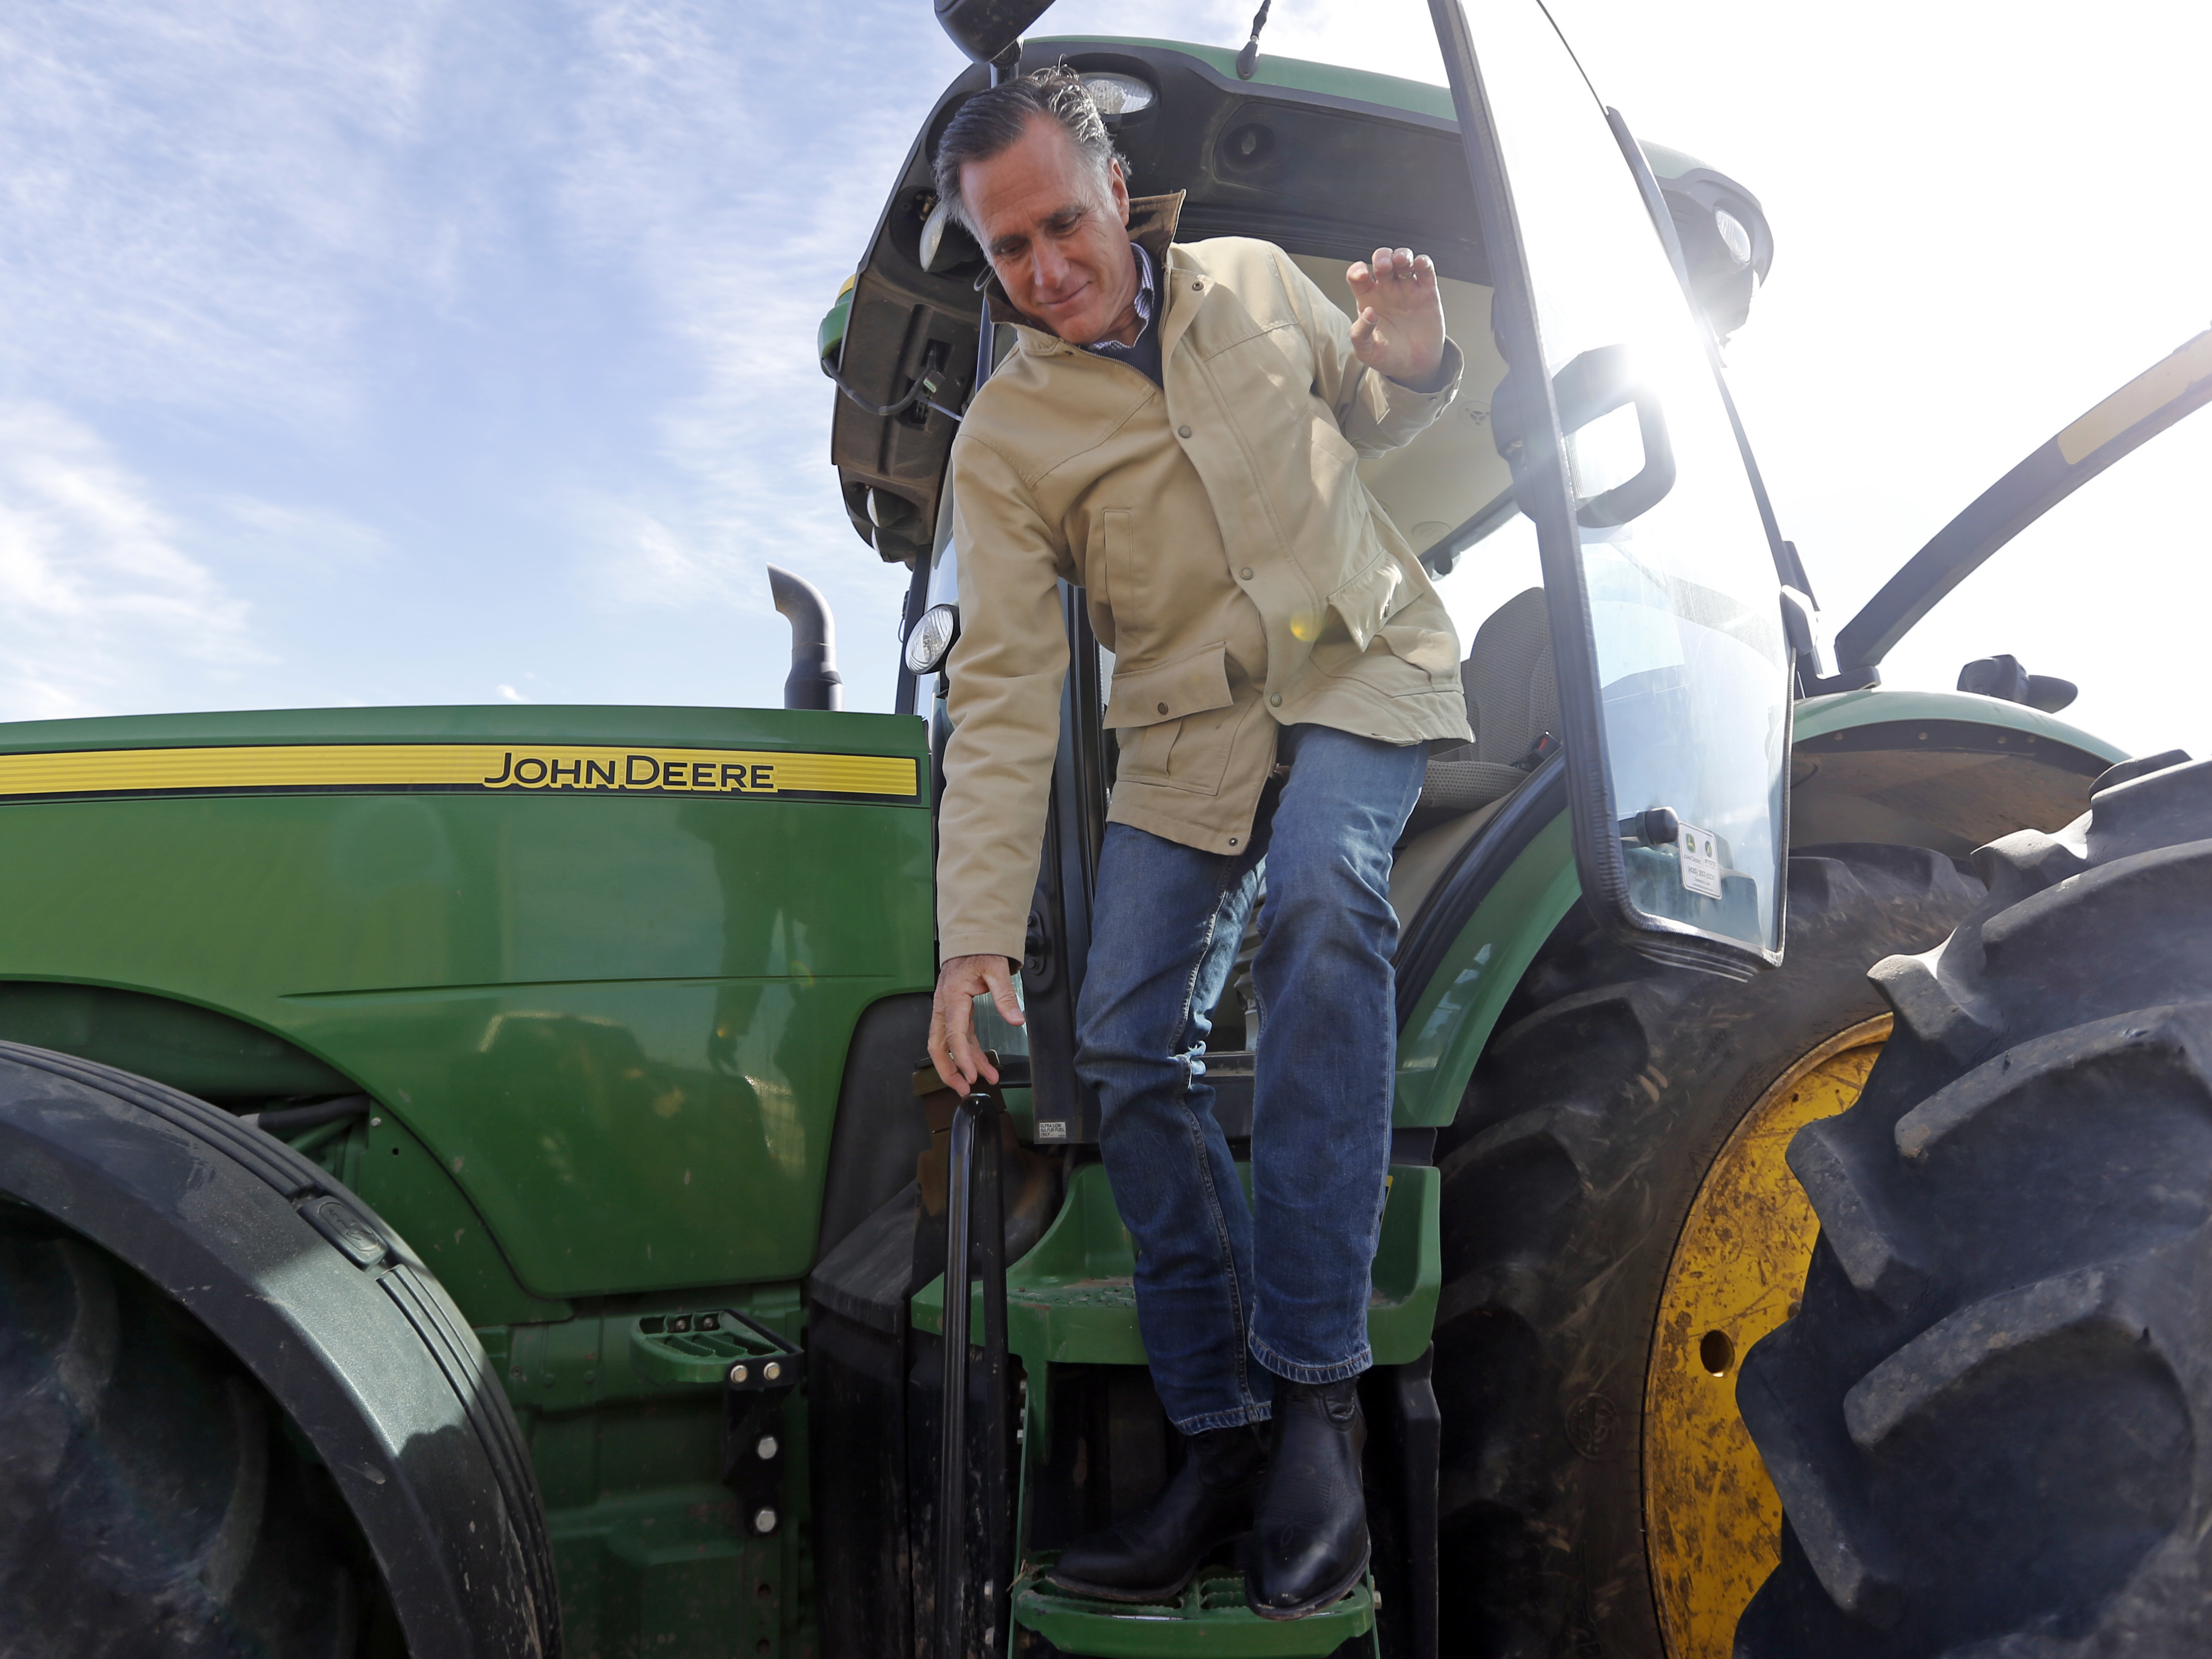 Former Republican presidential candidate Mitt Romney climbs down from a tractor during a tour of Gibson's Green Acres Dairy Friday, Feb. 16, in Ogden, Utah. Romney hopes to win the seat being vacated by retiring seven-term Utah Sen. Orrin Hatch.